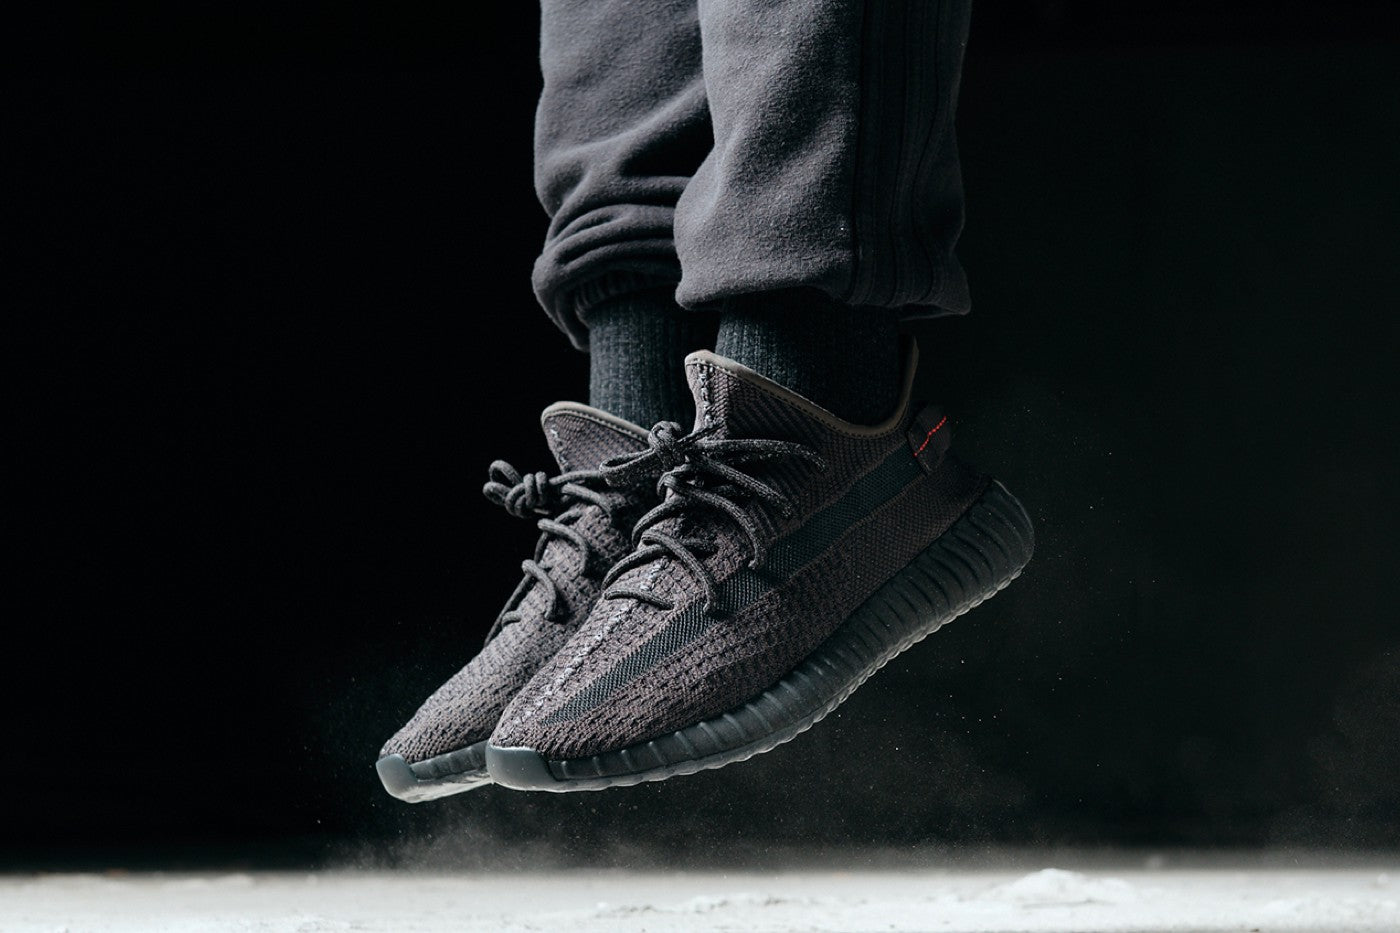 Kanye West x adidas is Officially Back